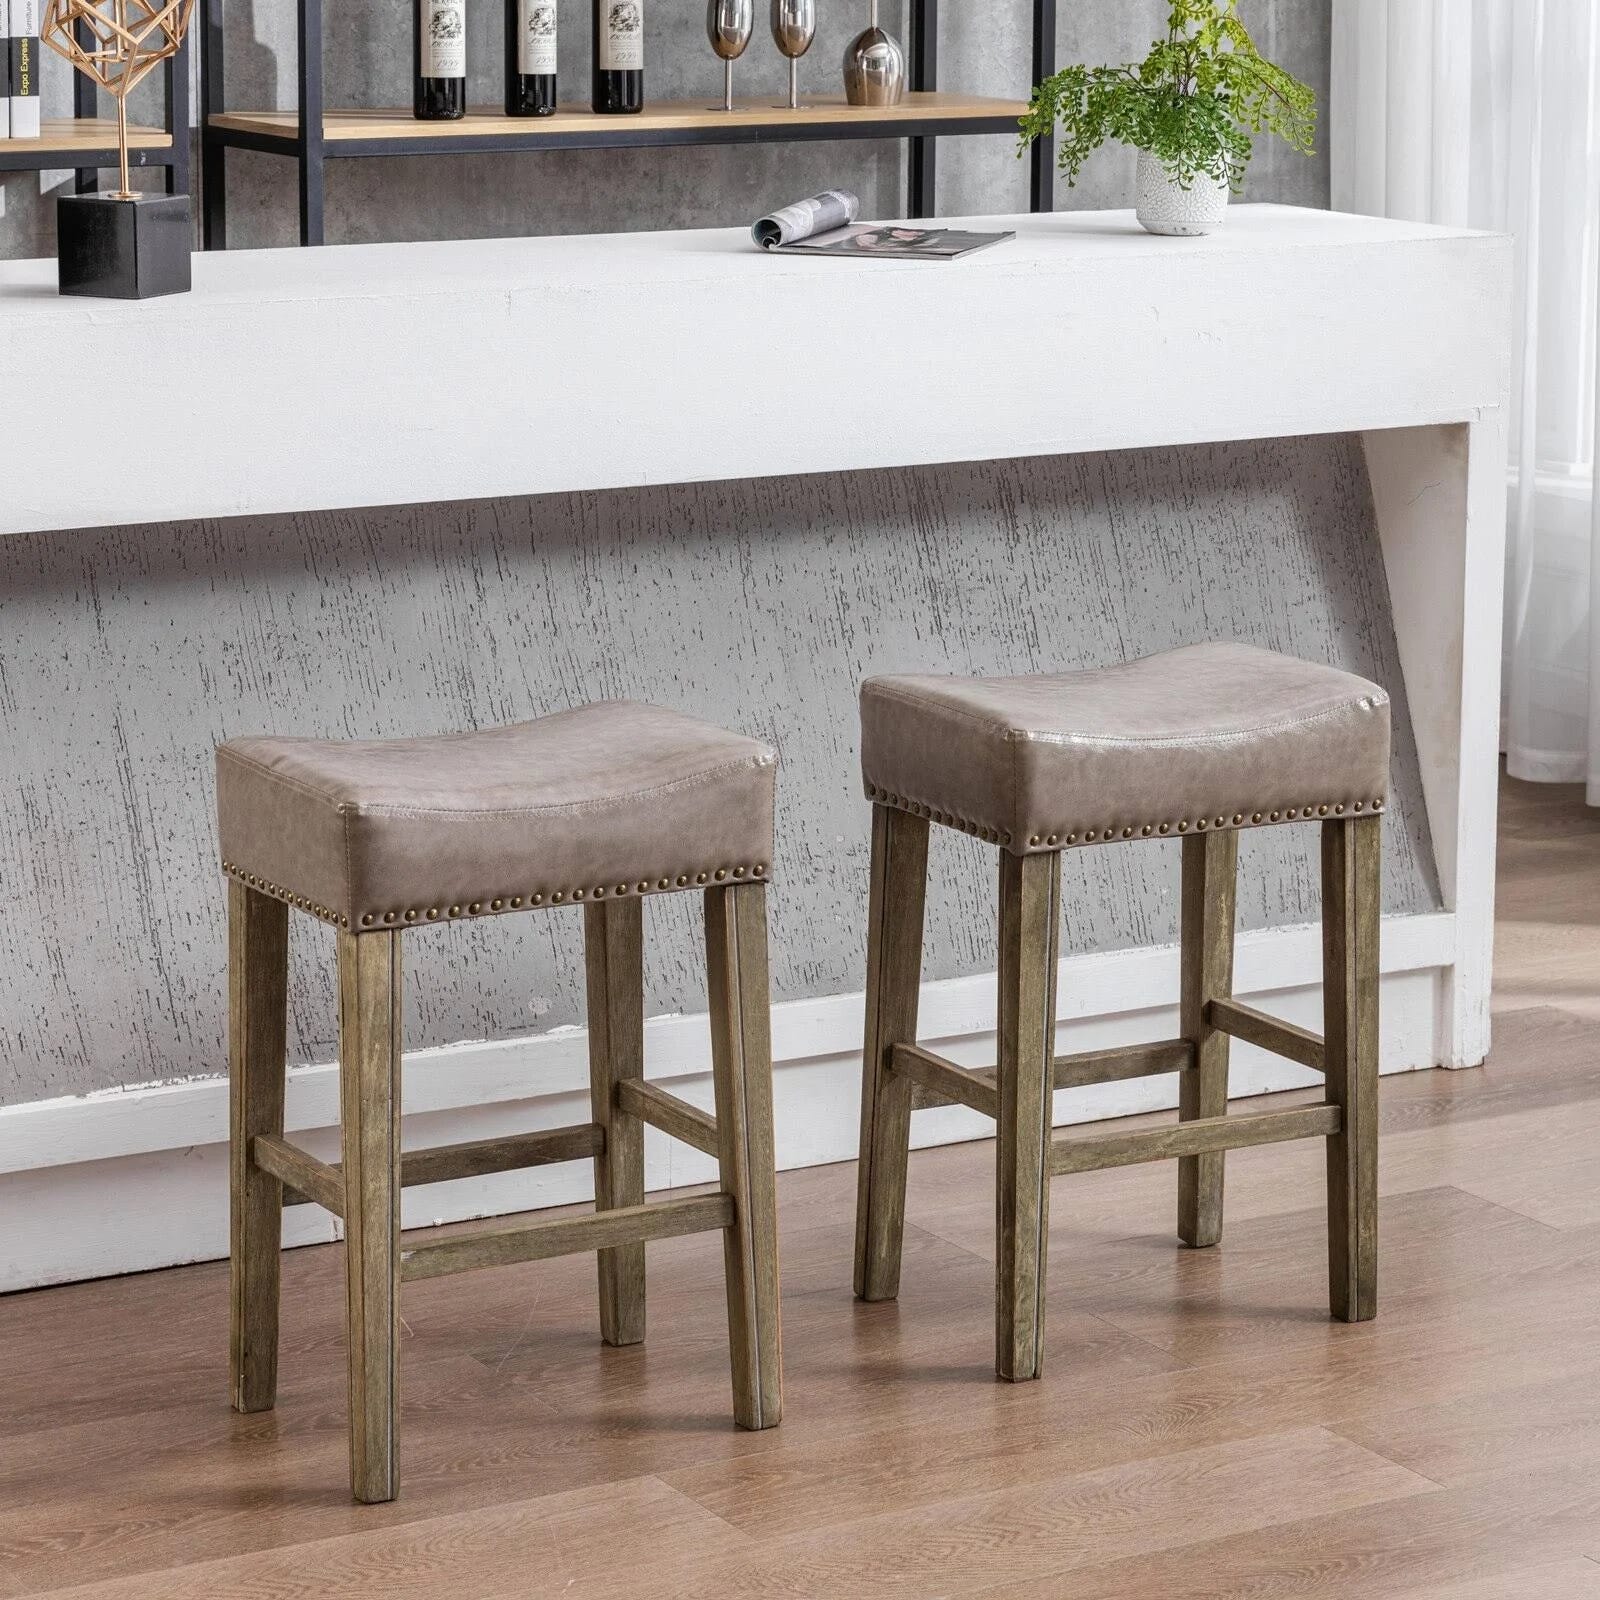 Gray Counter Height Faux Leather Bar Stools | Image